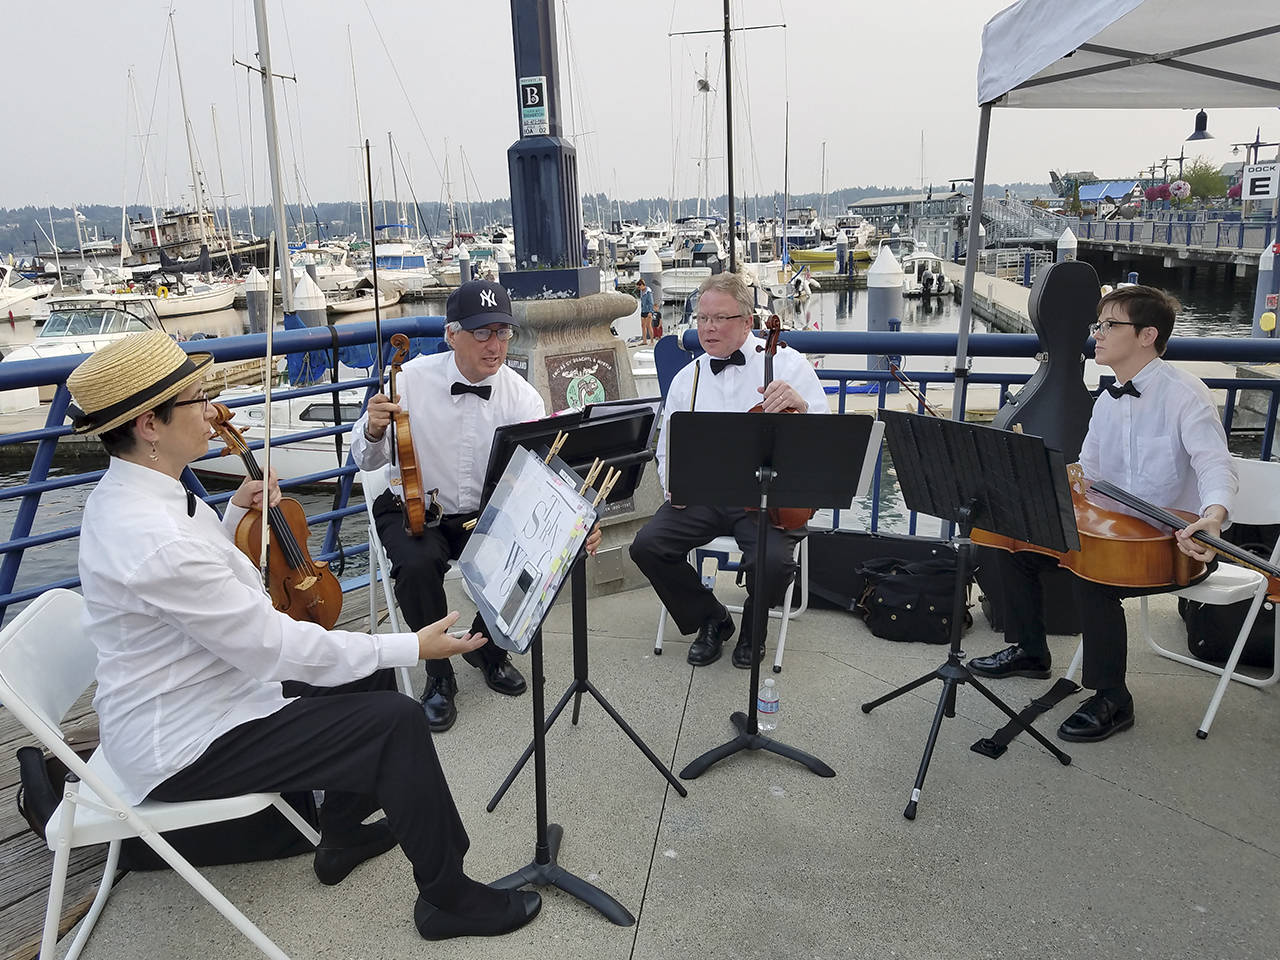 The Take Four String Quartet entertained guests as they came aboard as well as on the fantail later in the evening.                                Terryl Asla/Kitsap News Group